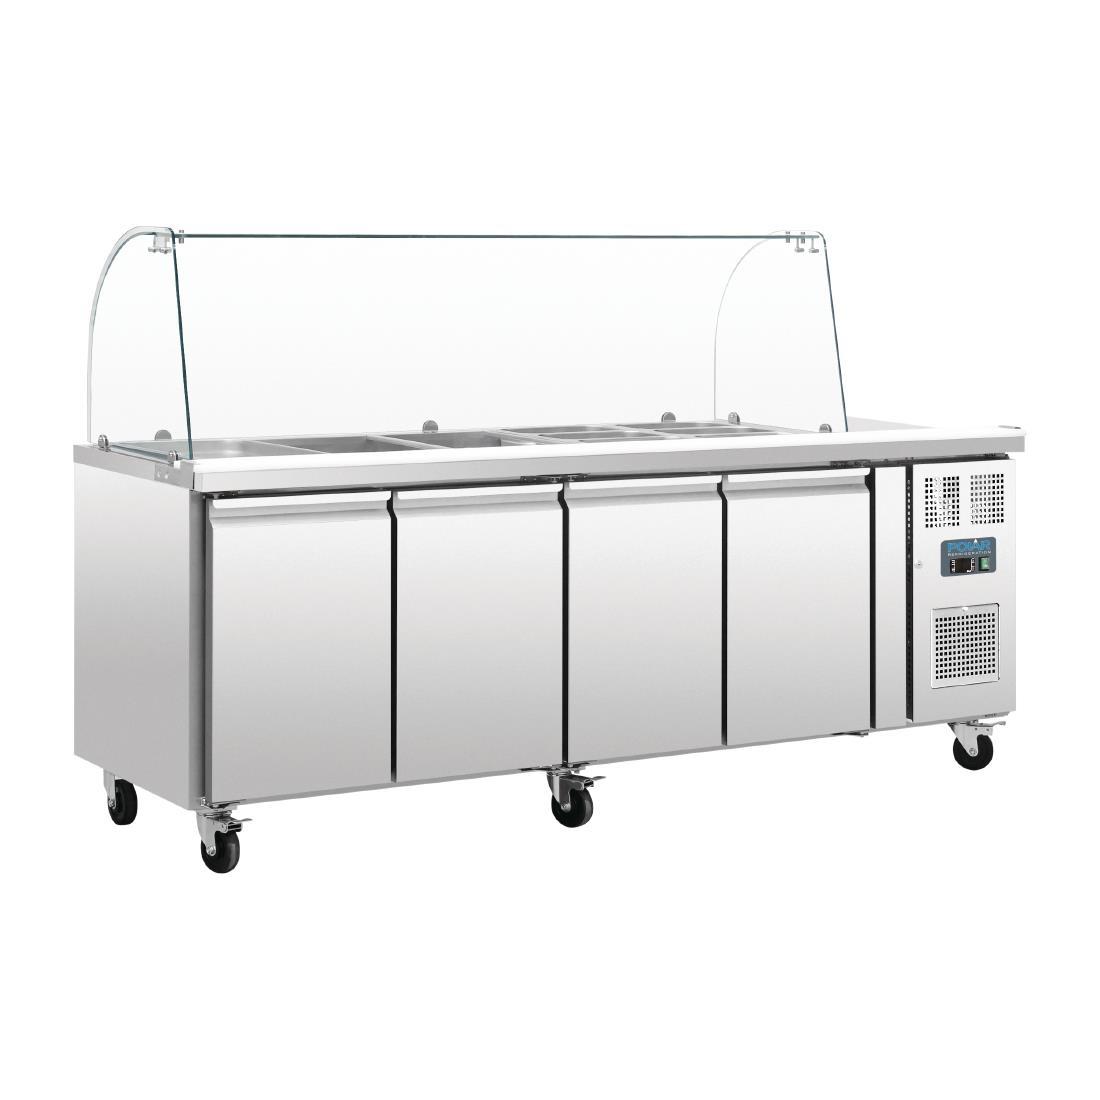 Polar U-Series Four Door Refrigerated Gastronorm Saladette Counter - CT395  - 1